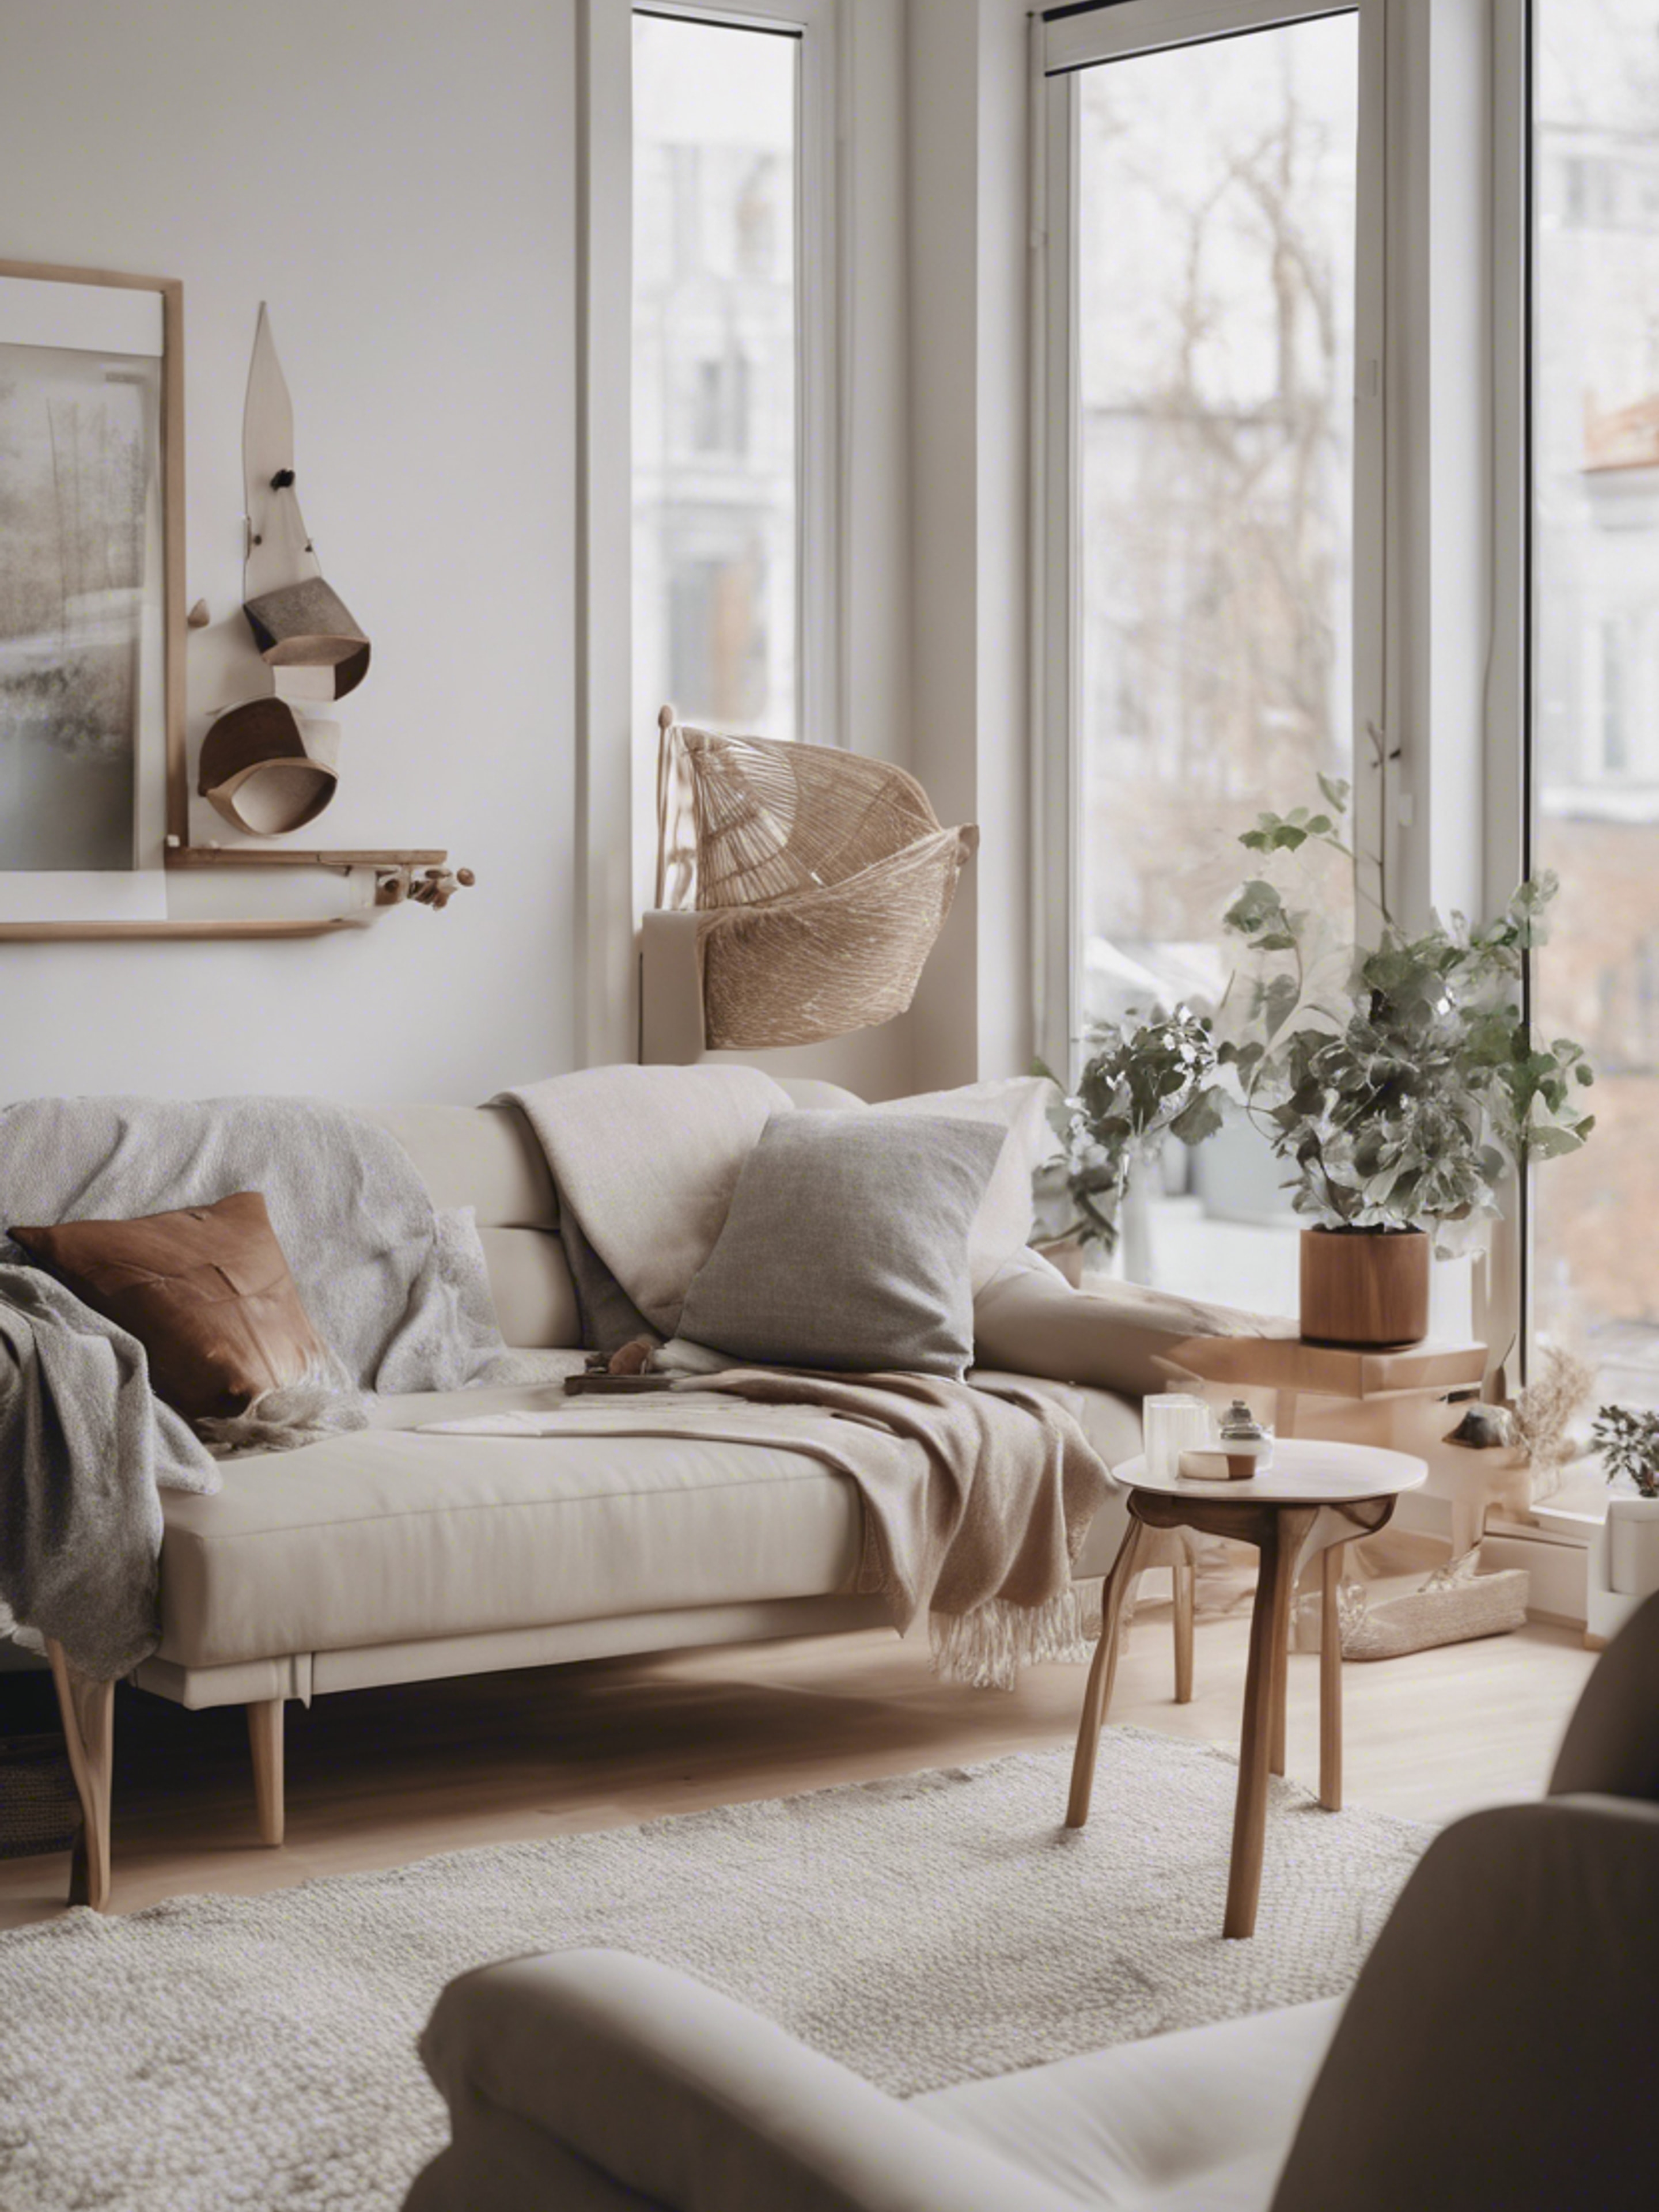 A Nordic-styled apartment with minimalist design, neutral color palette, and cozy accents. 墙纸[7cbaae500de44ae0bb2d]